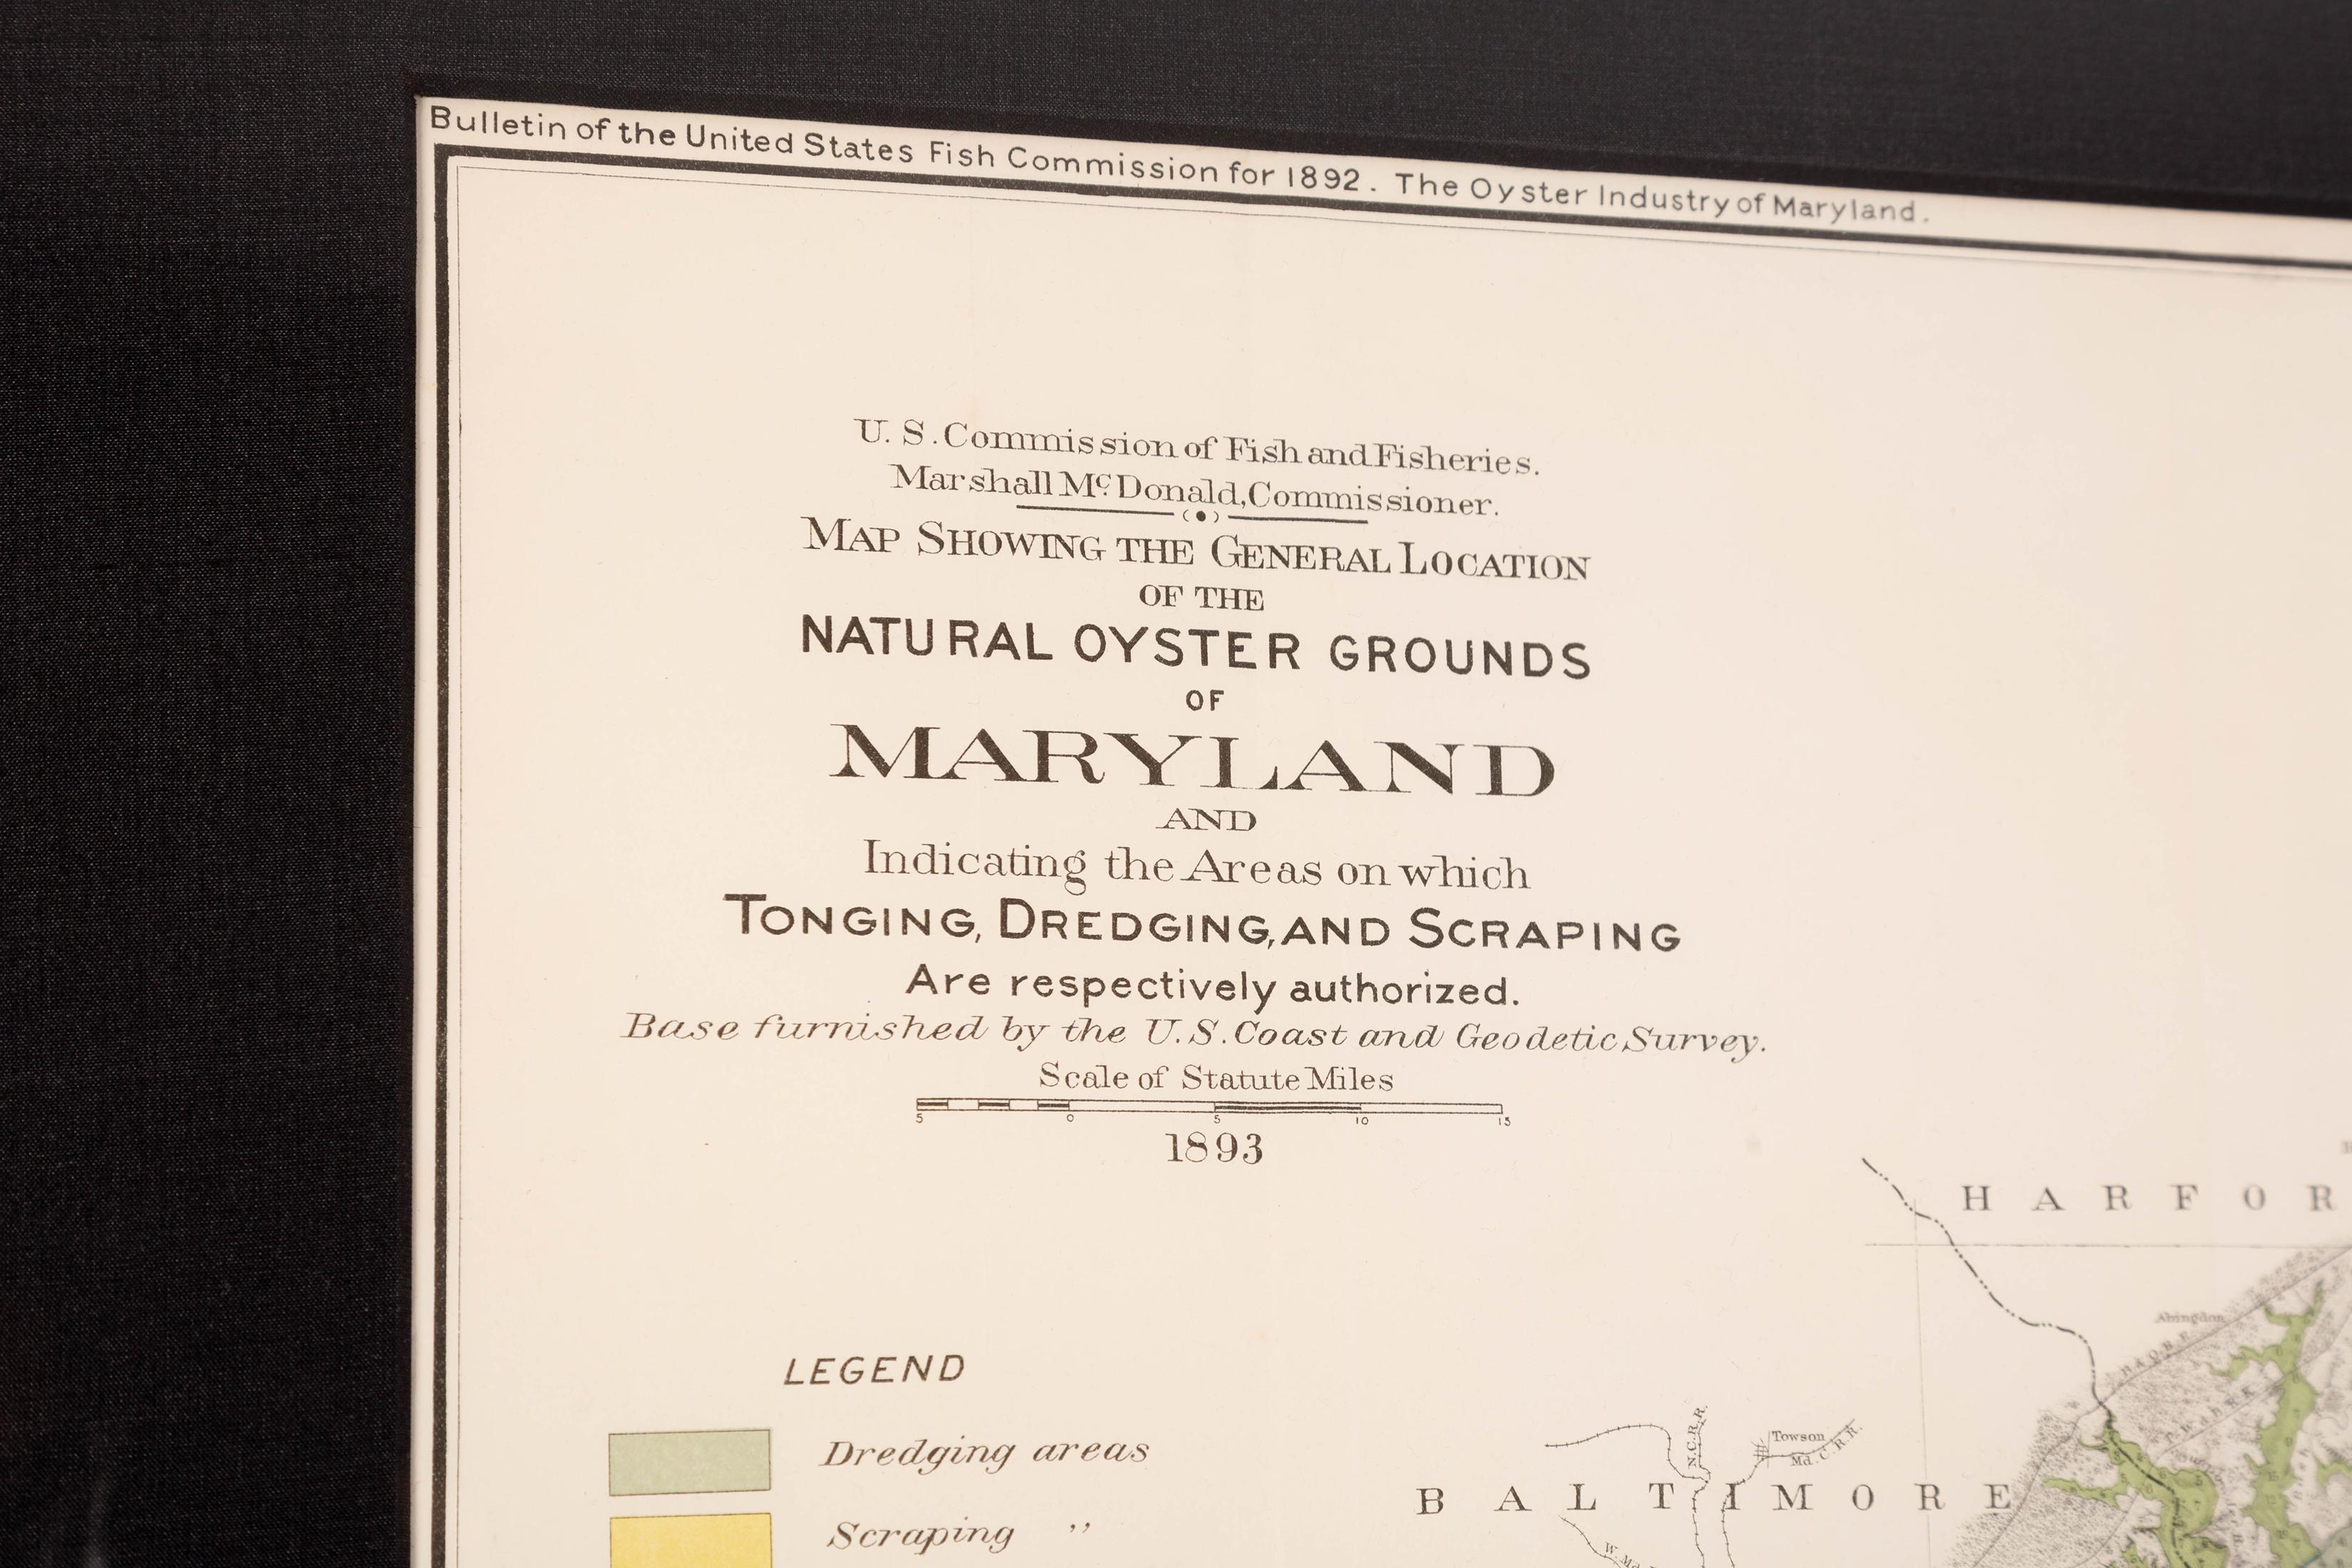 This map is an 1893 map of Maryland, a chart focused on the oyster fishing beds of the Chesapeake Bay and part of Chincoteague Bay. The map was published for the Bulletin of the United States Fish Commission, 1893. 

The Chesapeake Bay has long